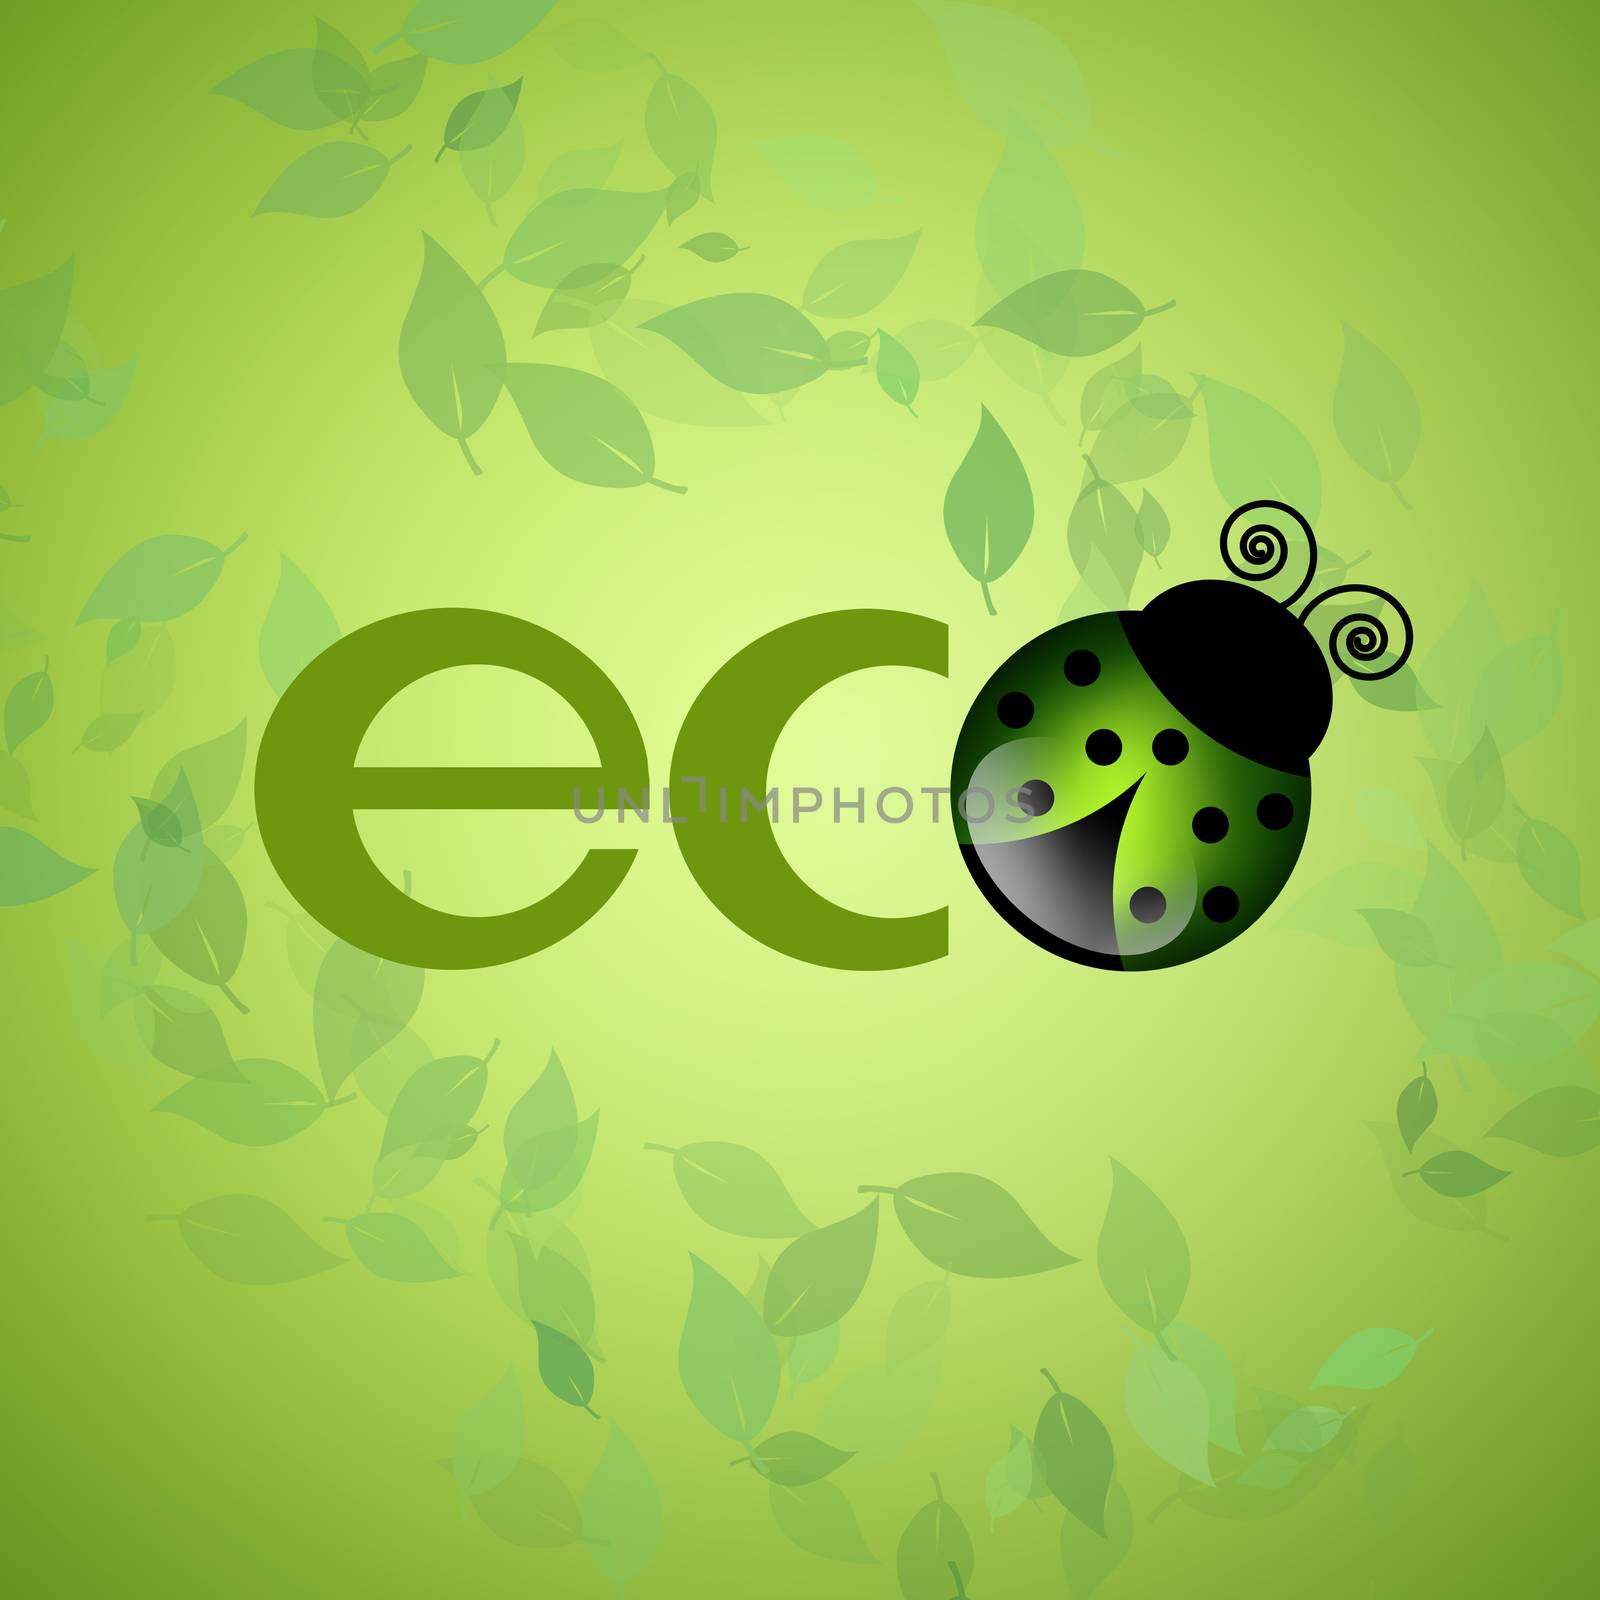 eco in the green background by sognolucido